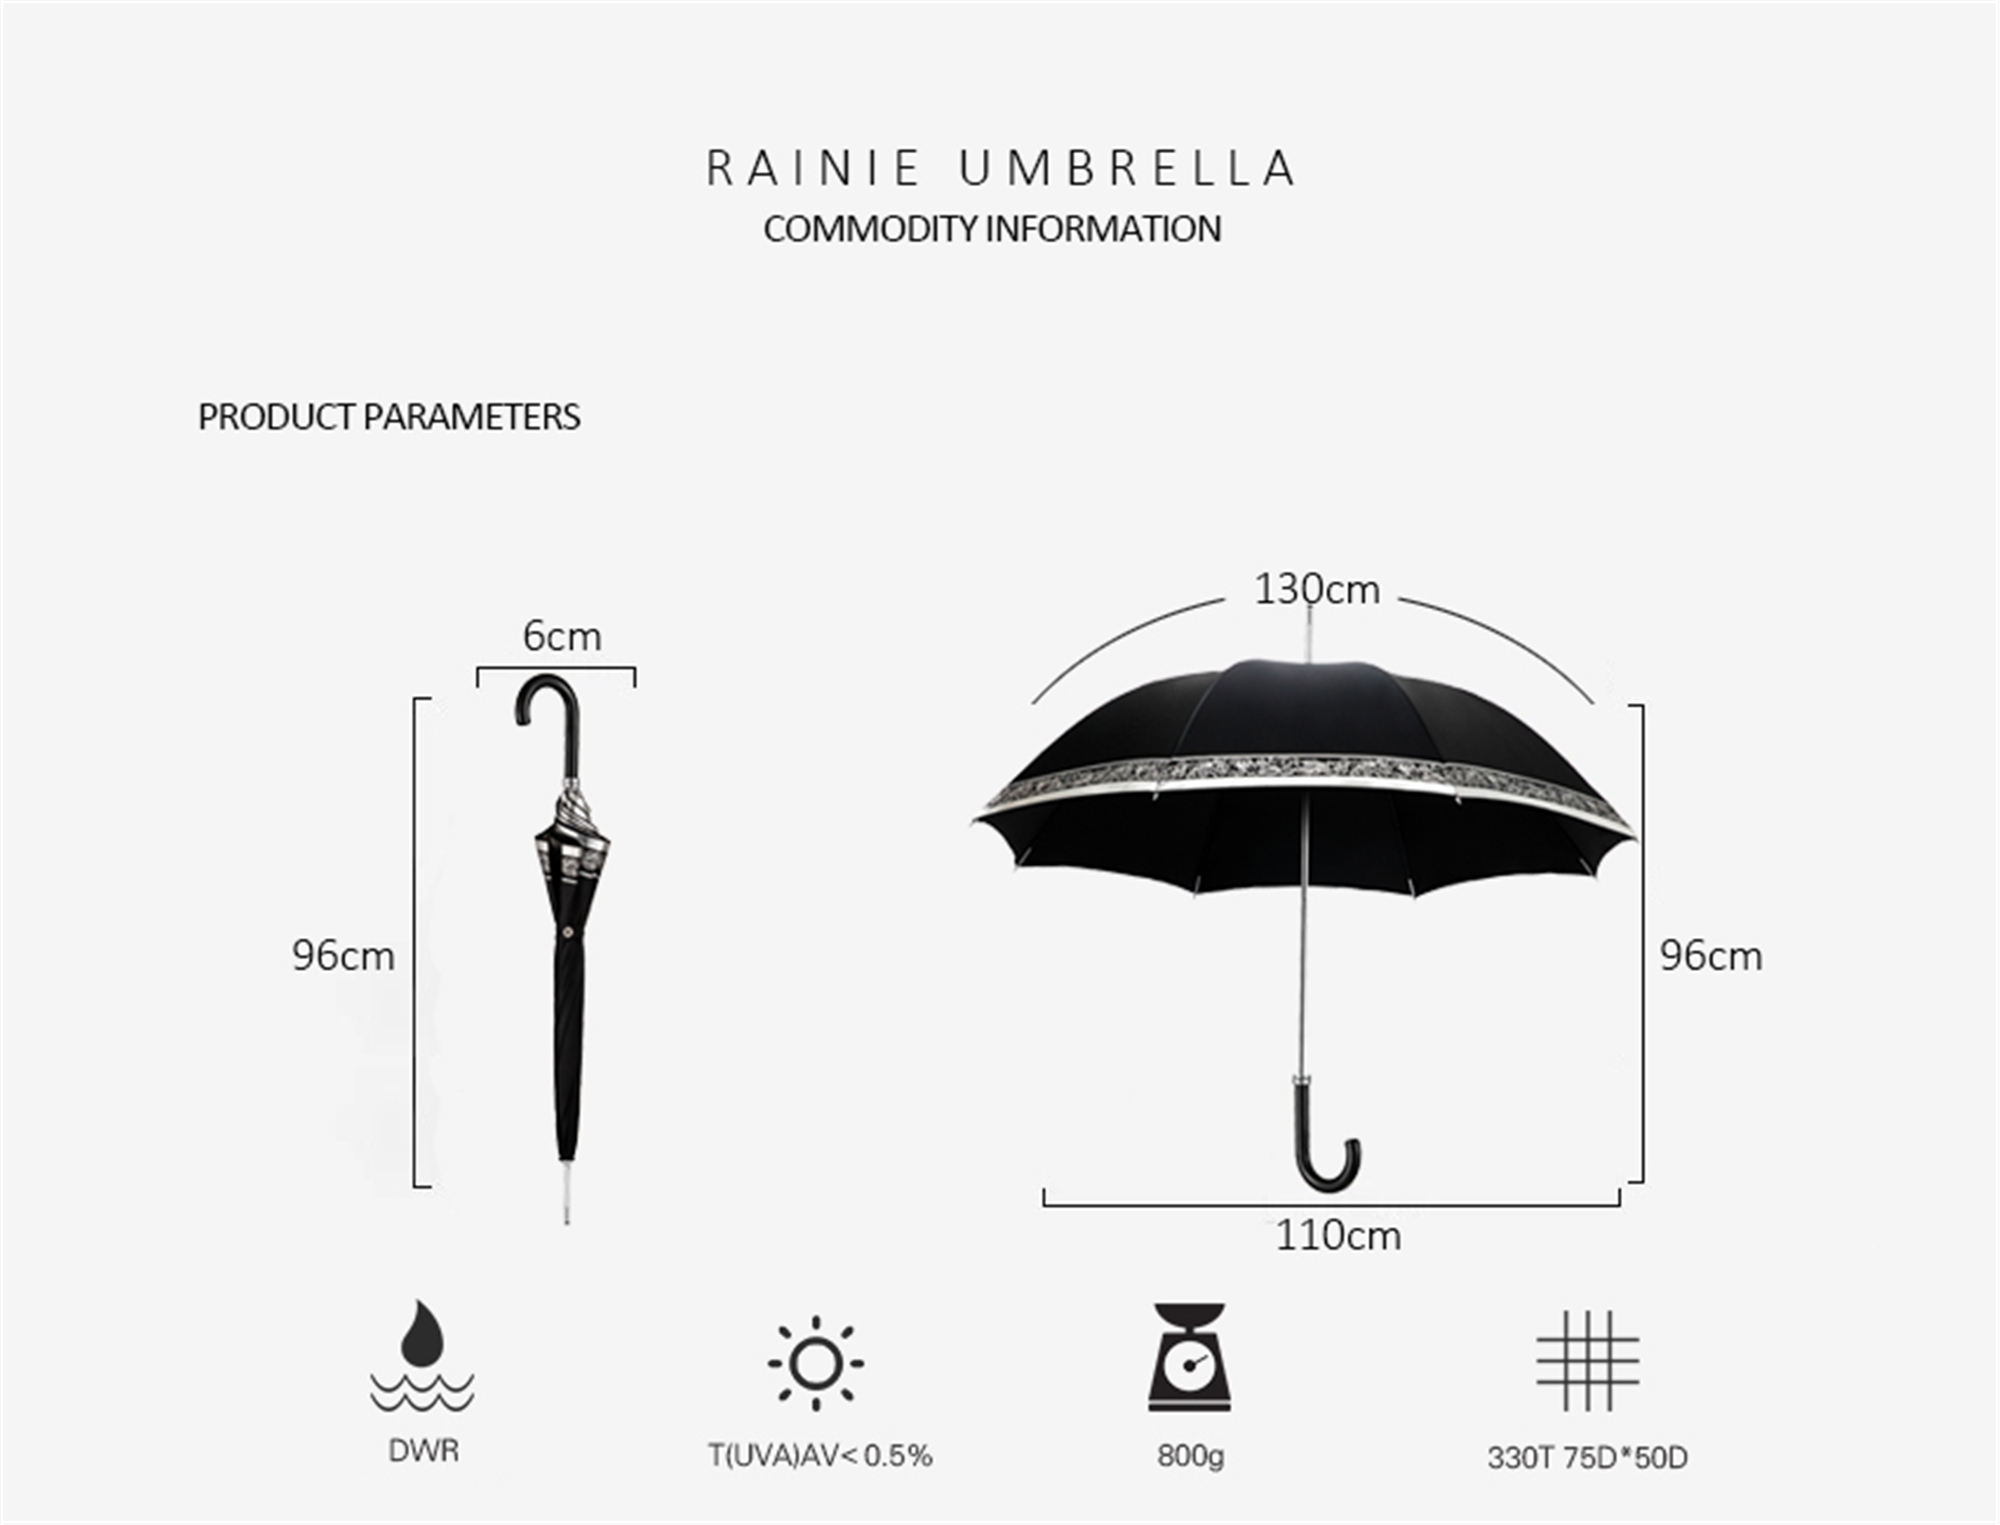 Lambskin umbrella with curved handle